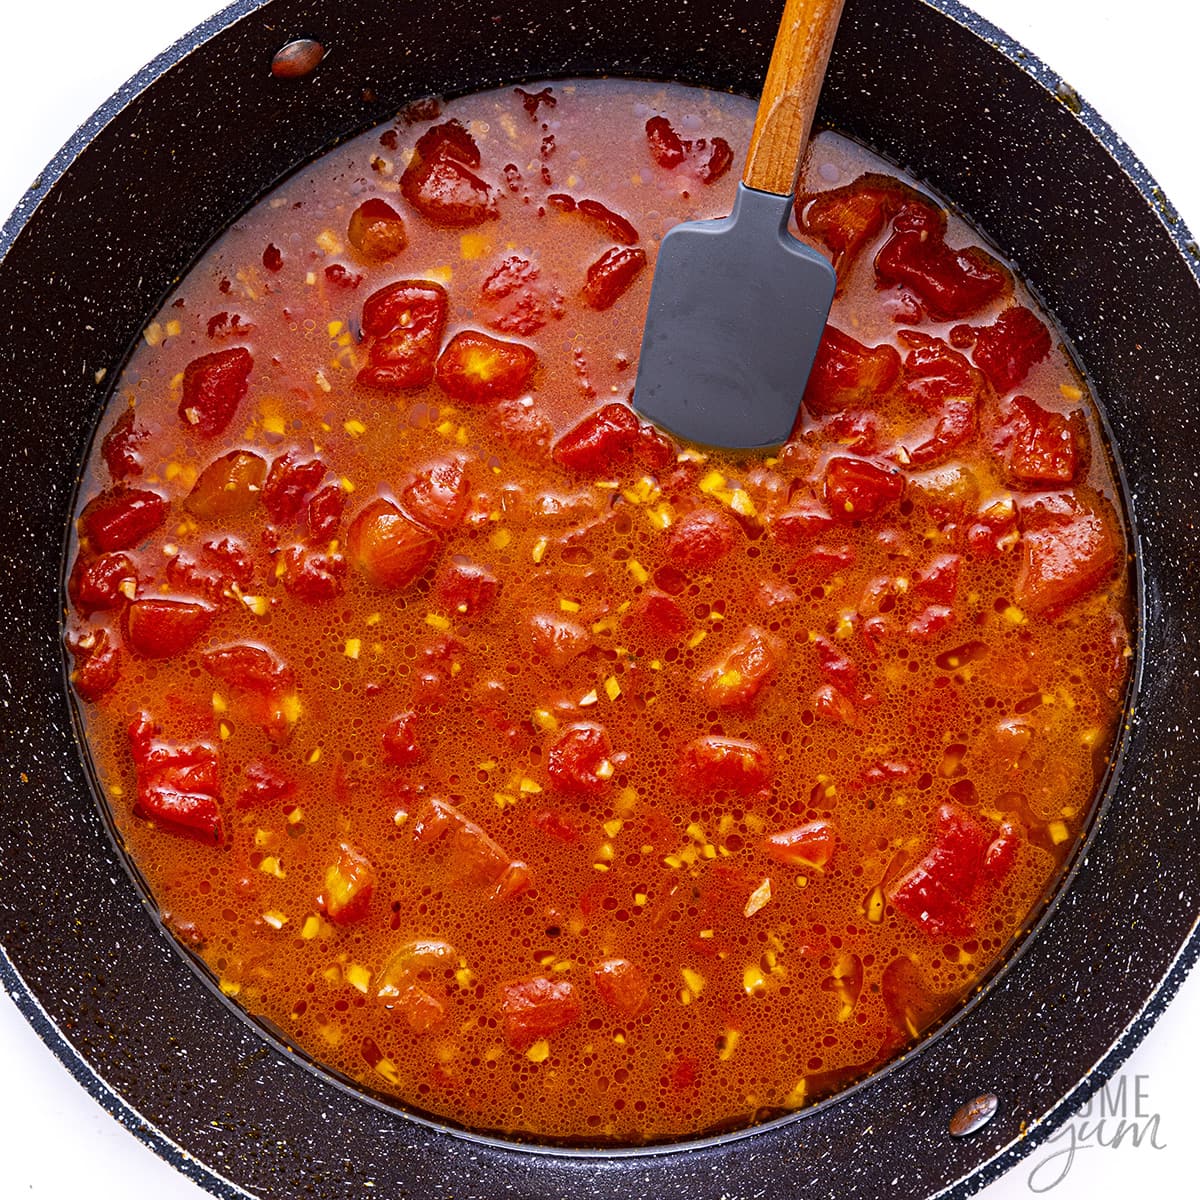 Diced tomatoes and broth added to skillet.